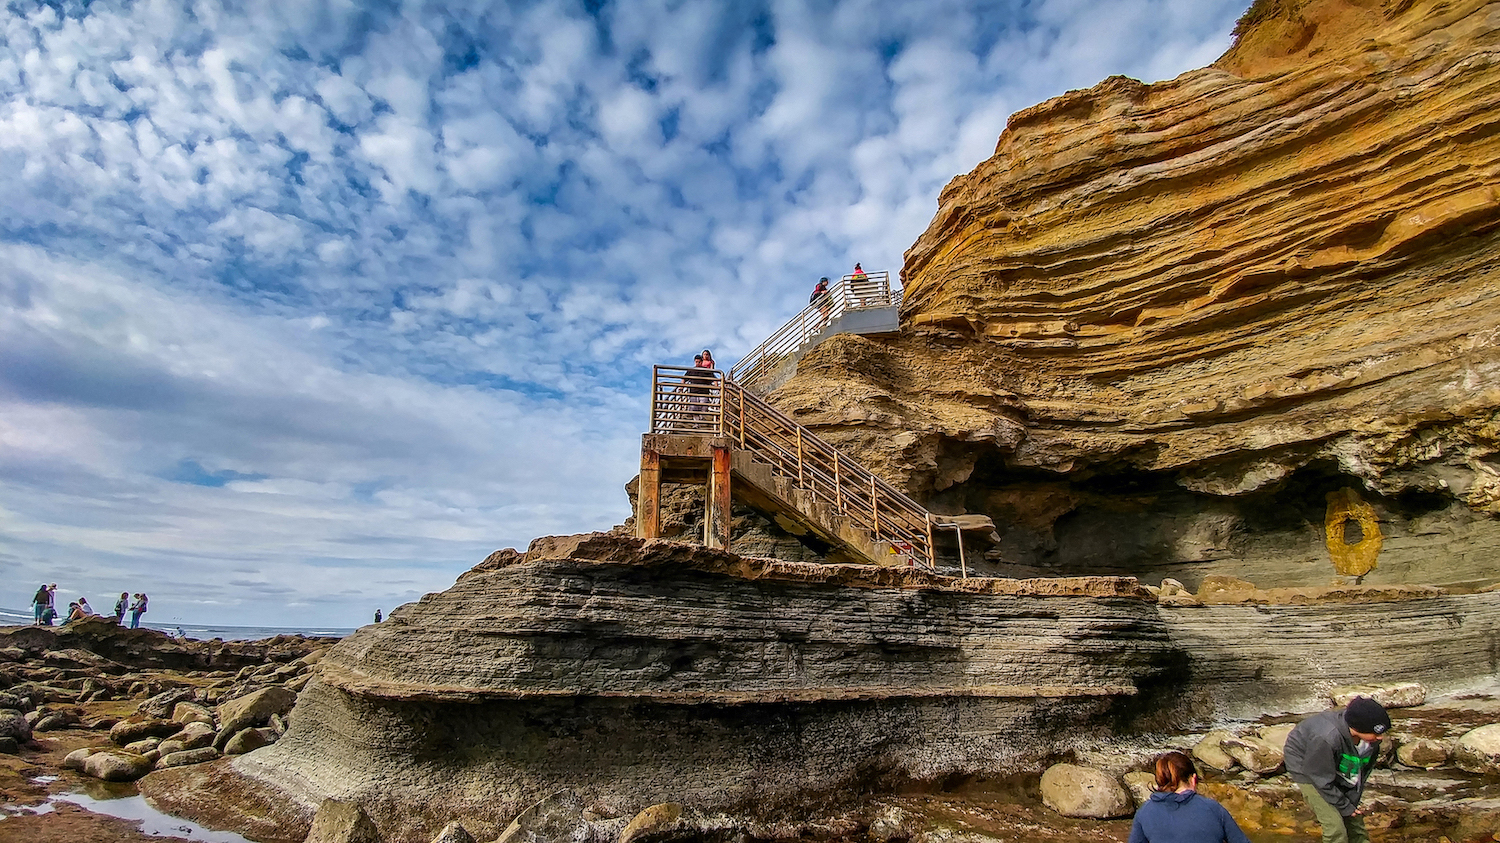 People descending the stairs at Sunset Cliffs.